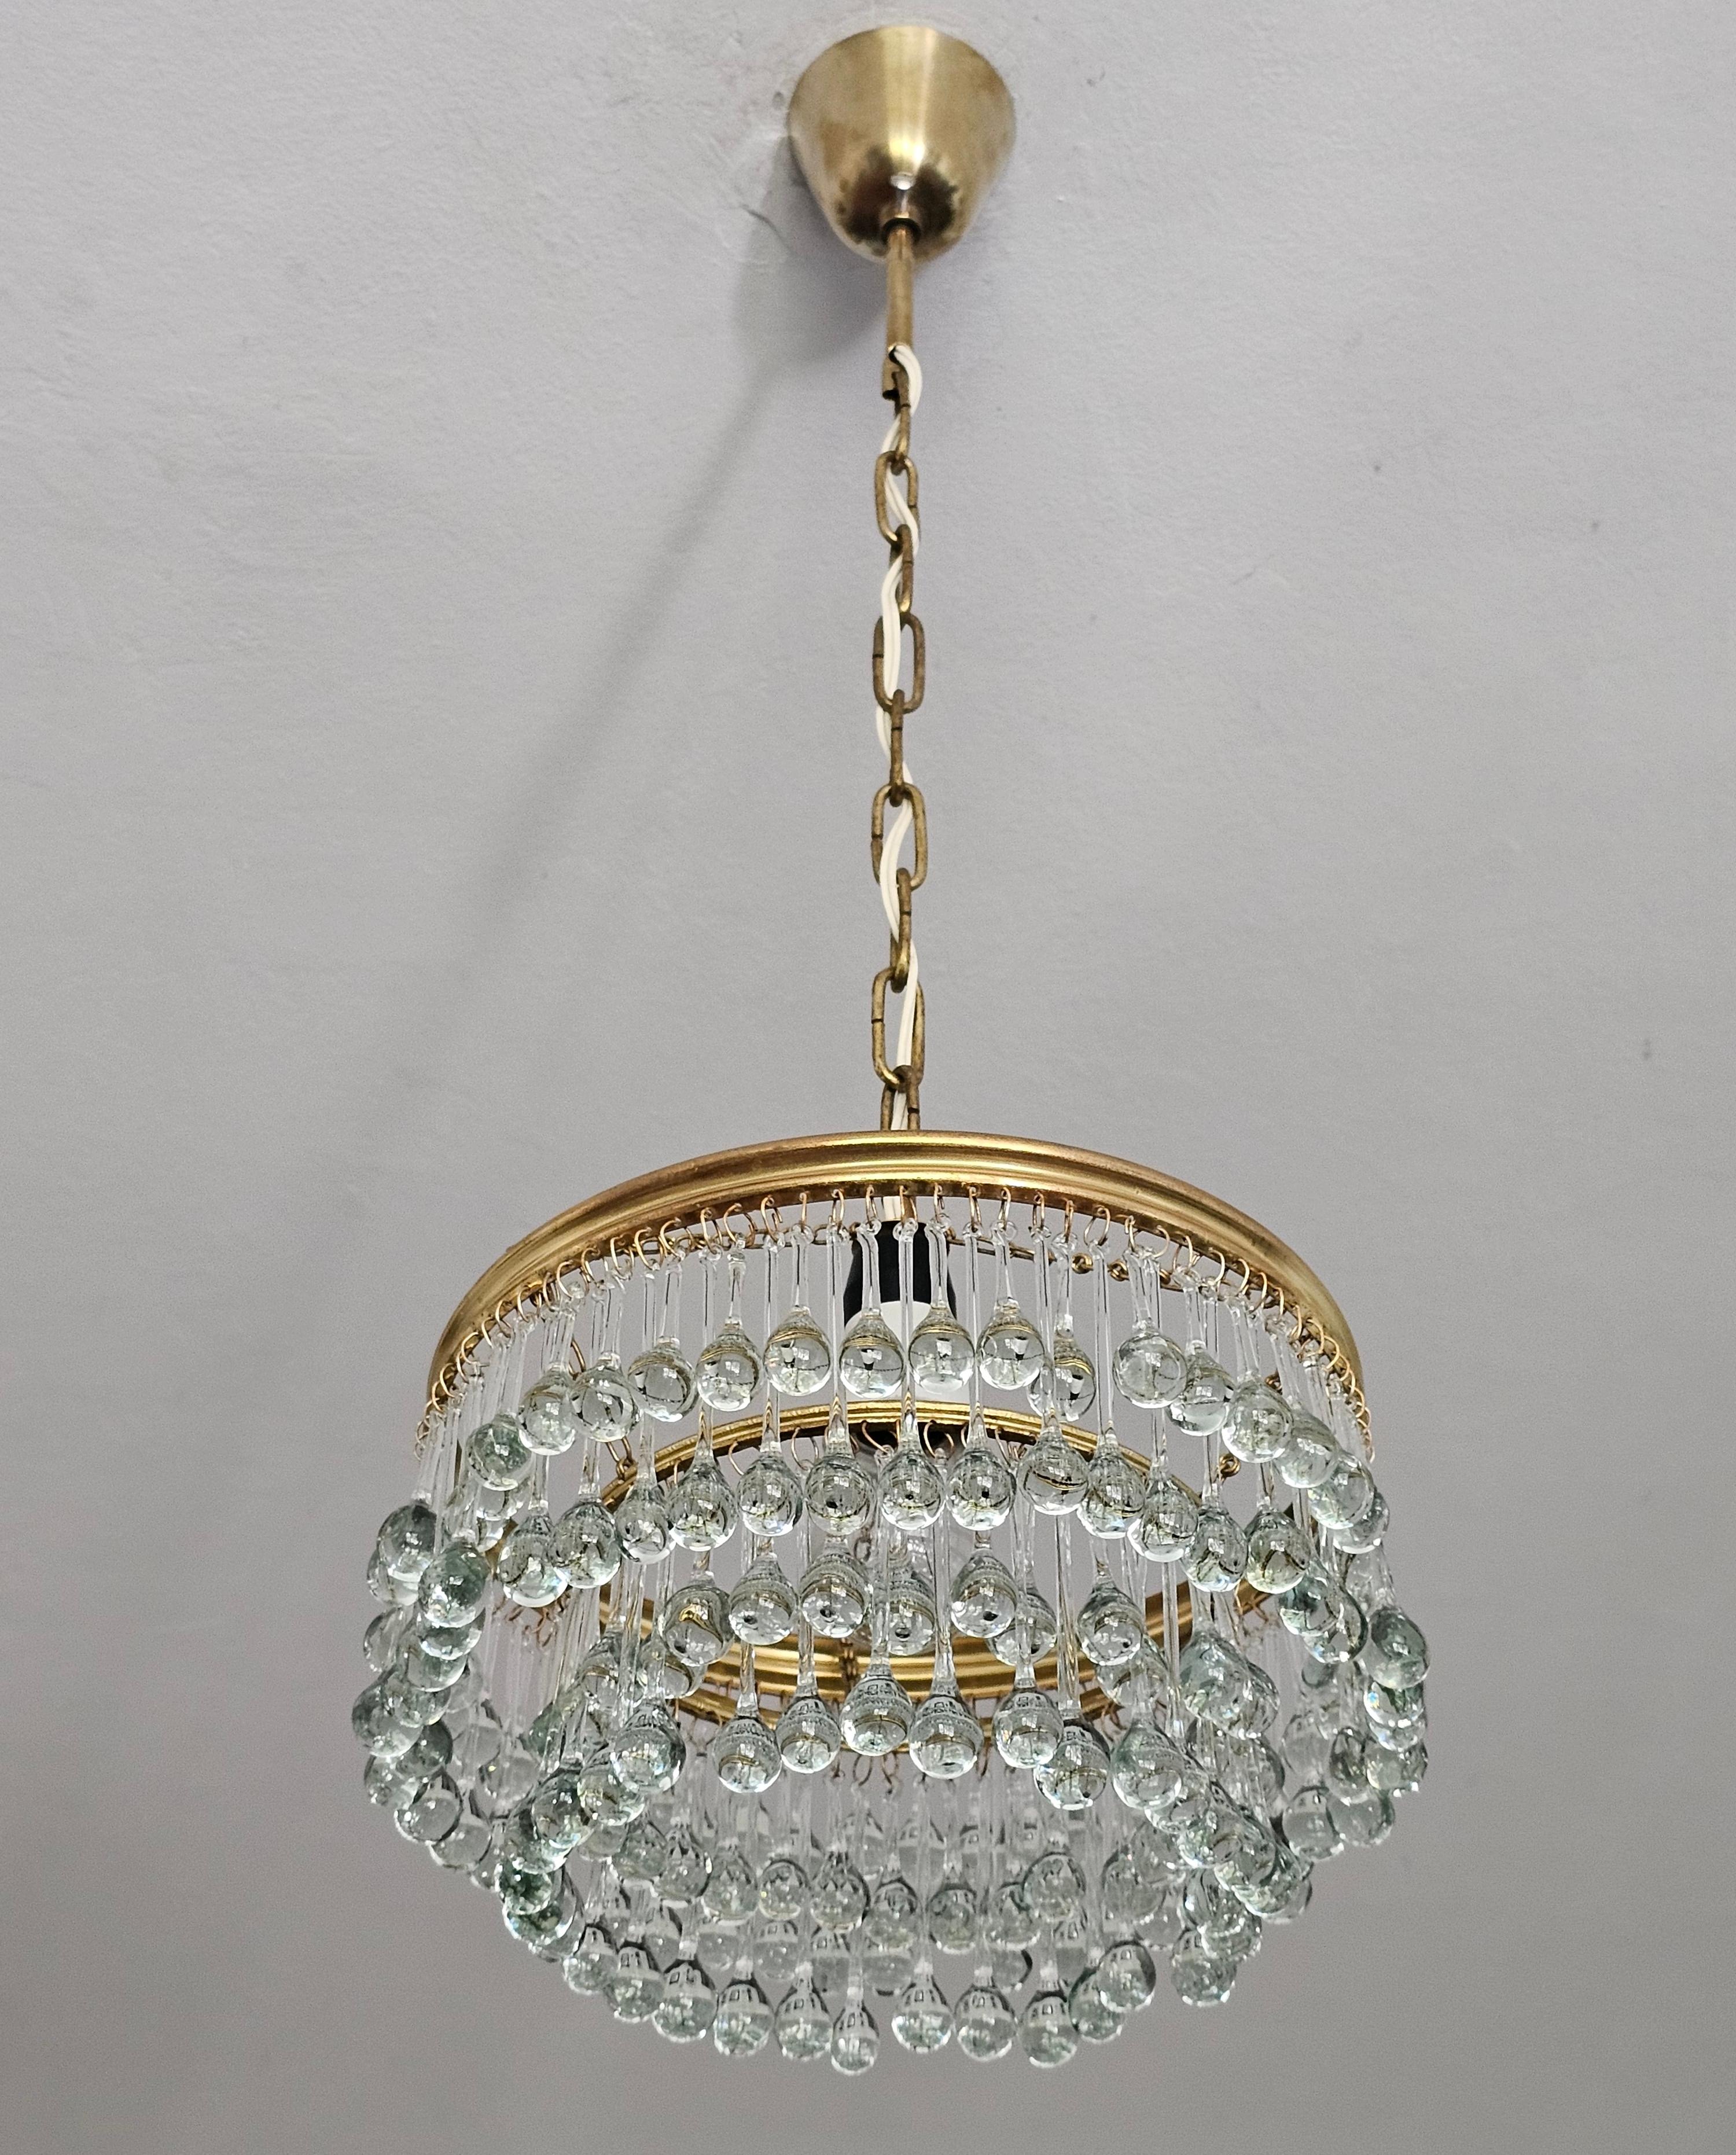 Small Hollywood Regency Chandelier with Mini Teardrop Crystals, Austria 1940s For Sale 4